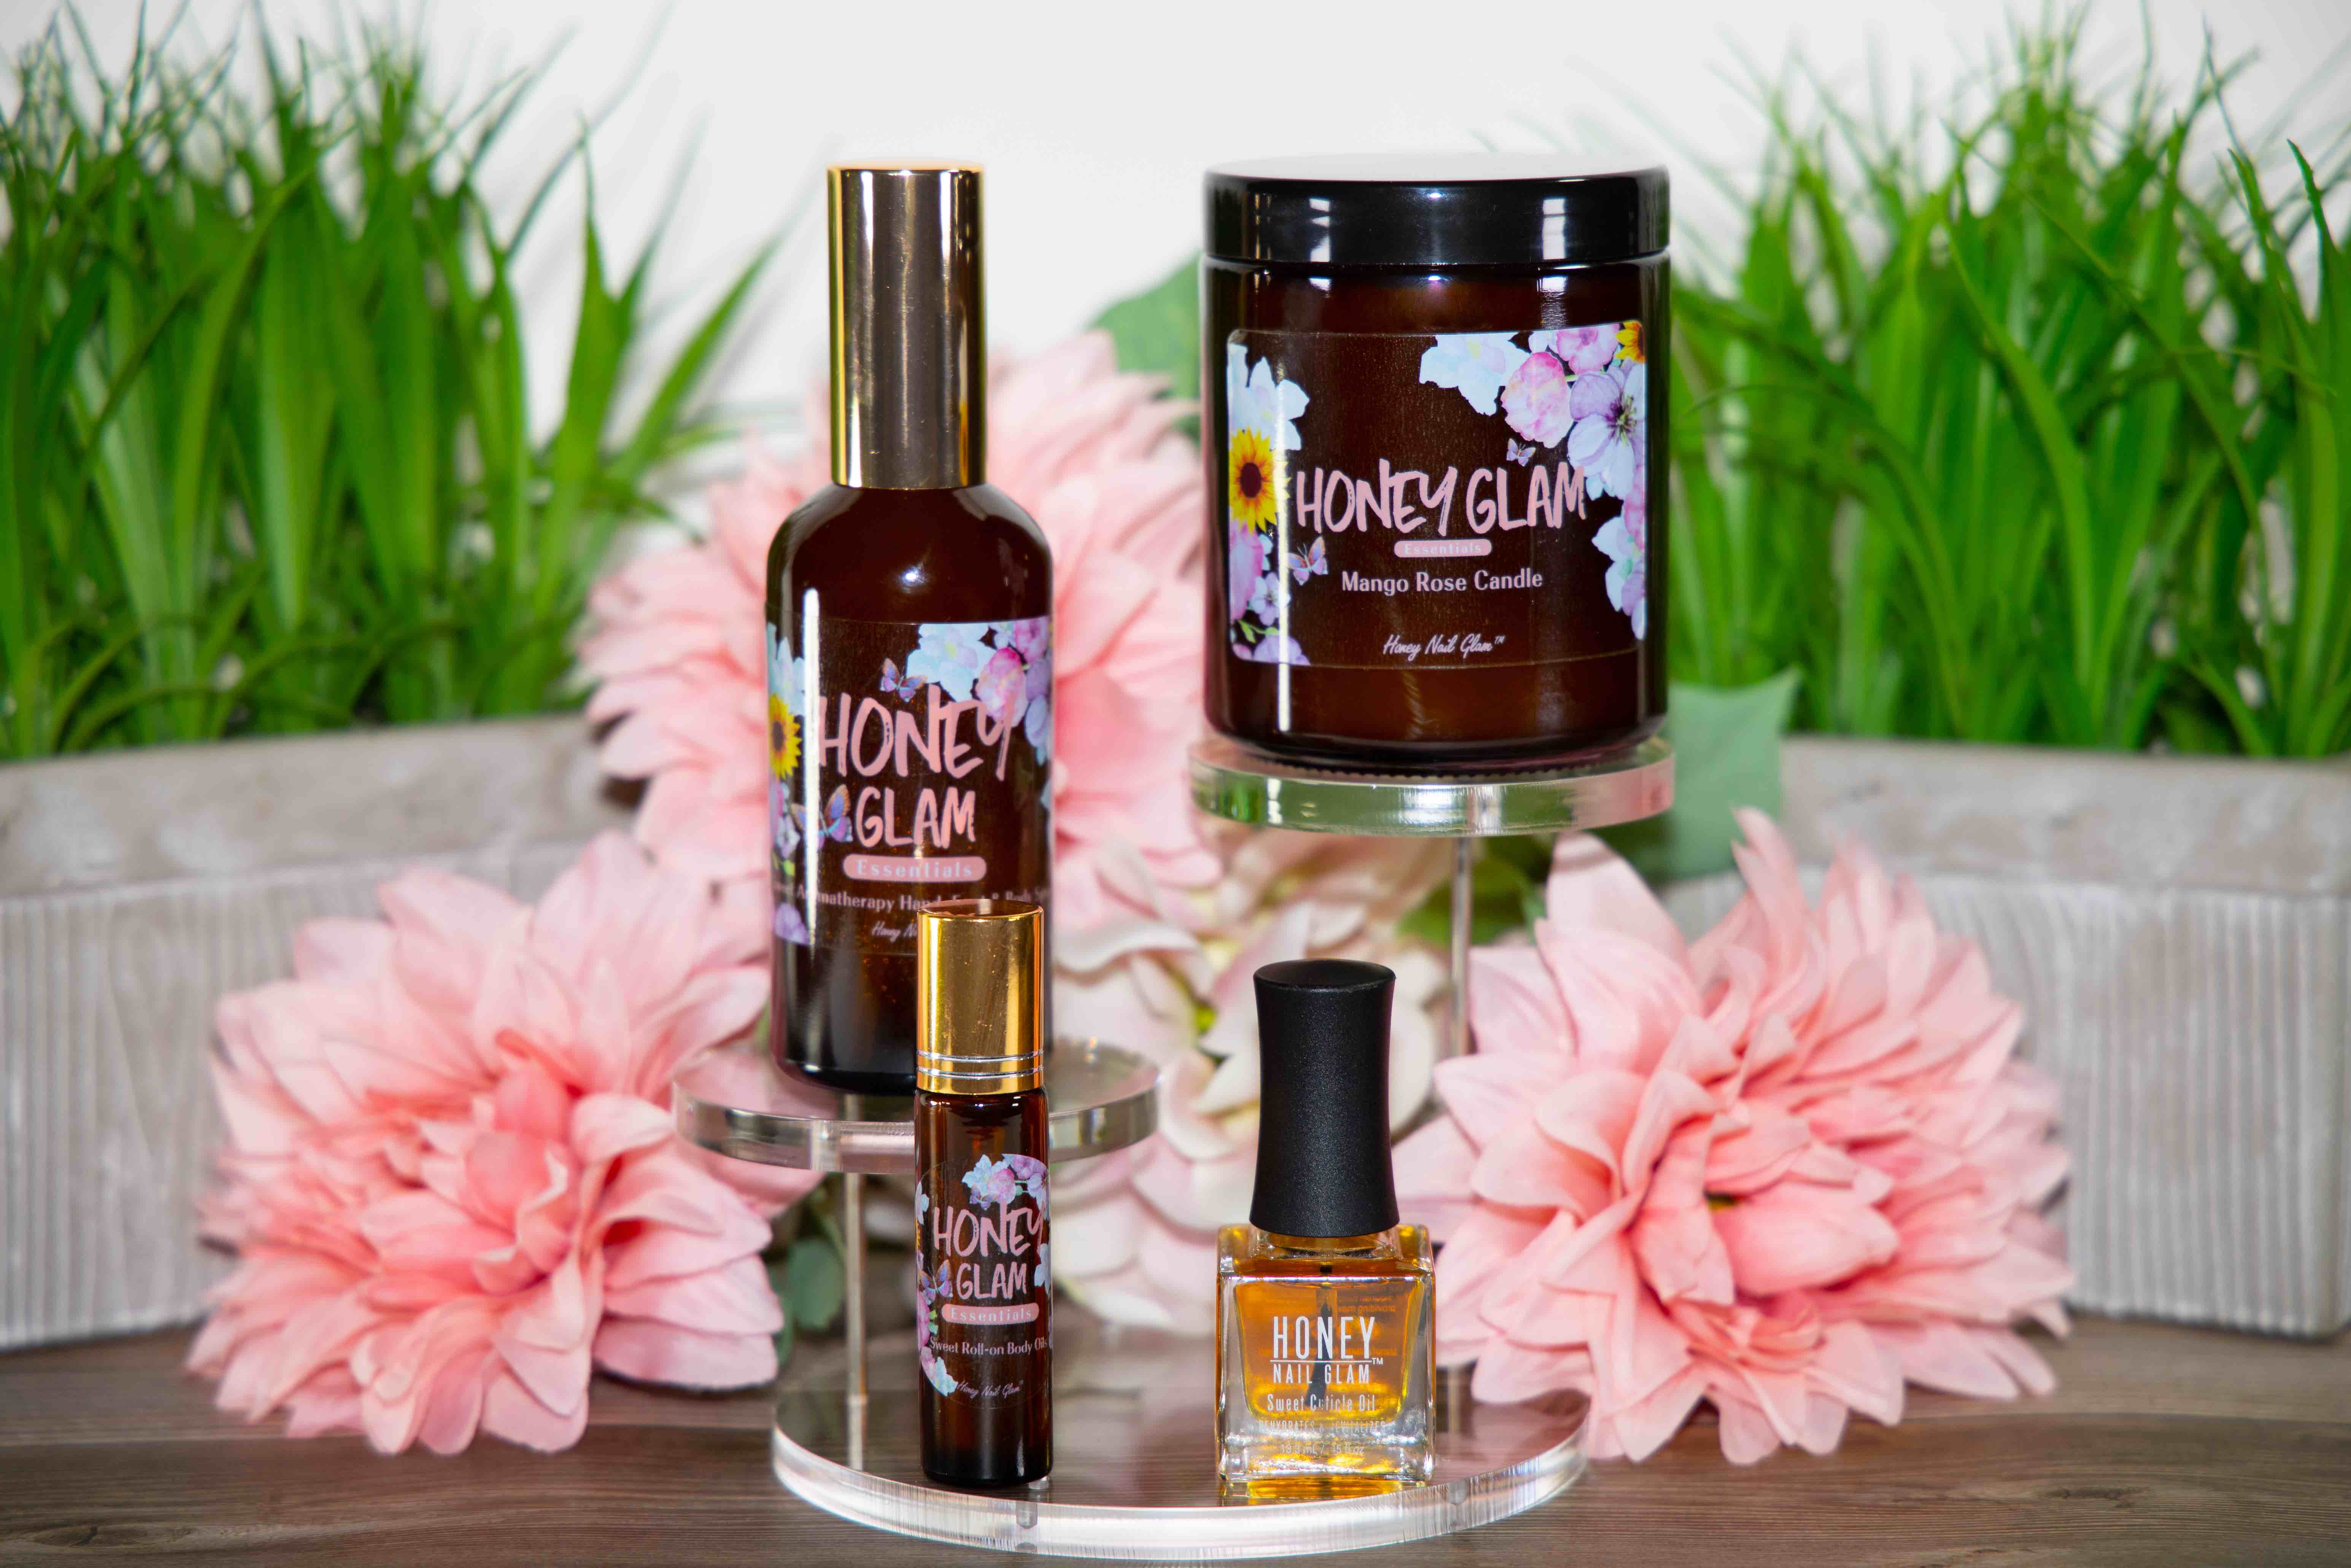 A group of eco-friendly wellness products from Lela Christine's Honey Nail Glam collection